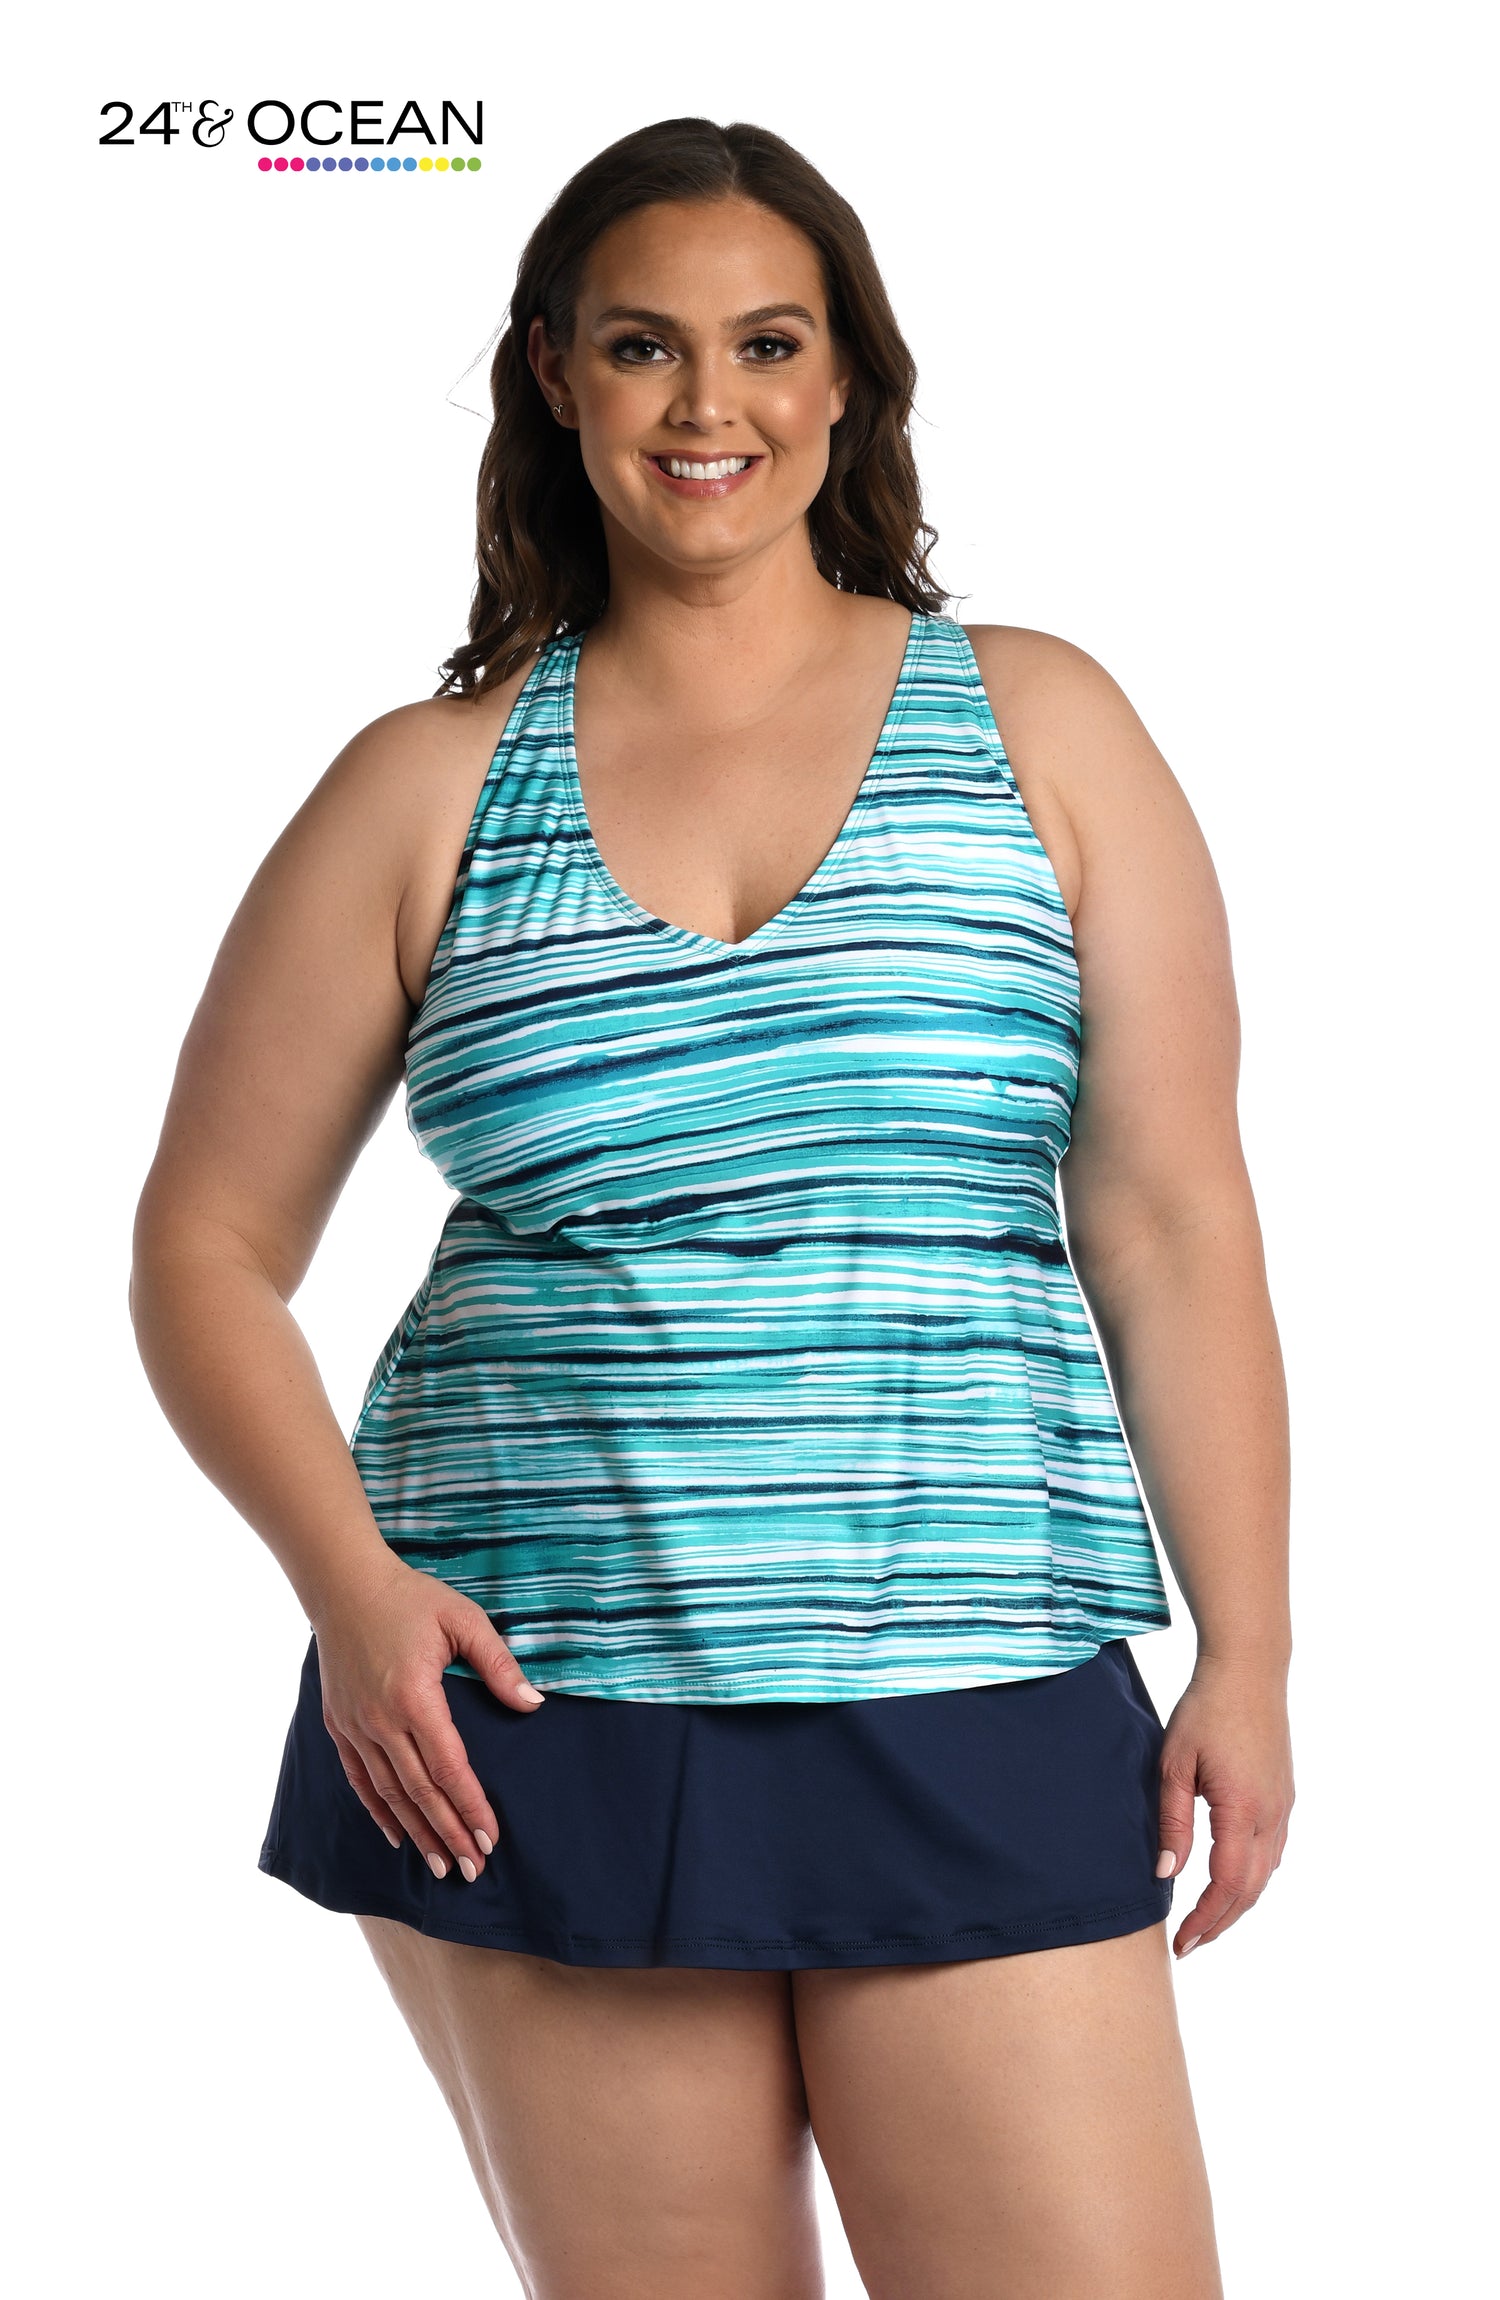 Model is wearing a teal multi colored striped printed over the shoulder tankini top from our Seaside Breeze collection!